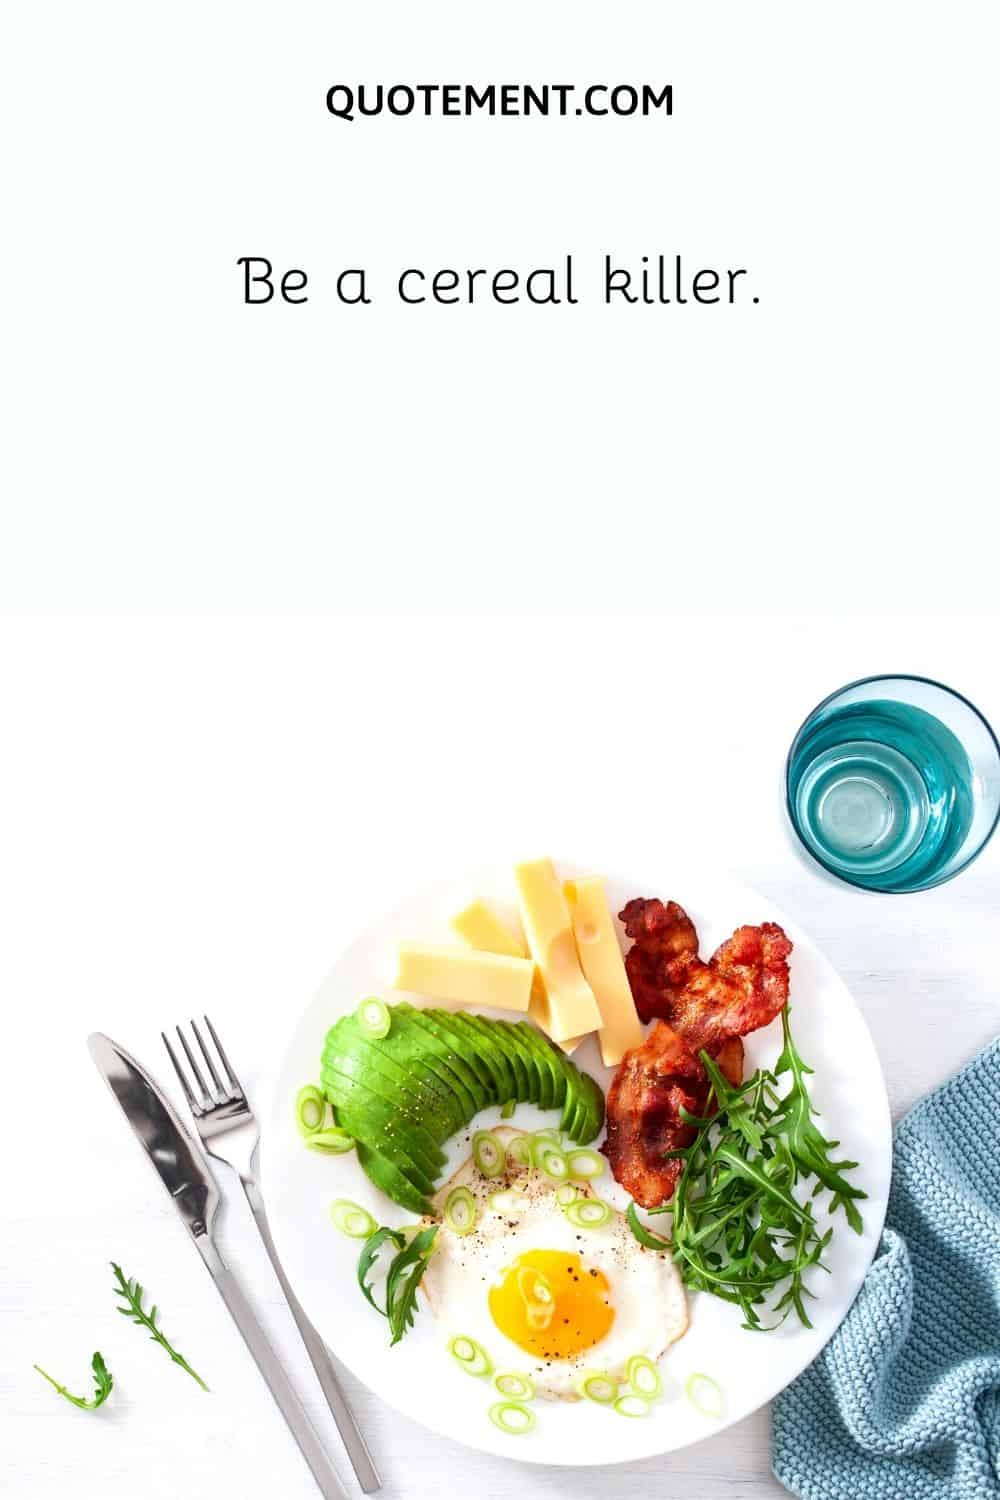 Be a cereal killer.